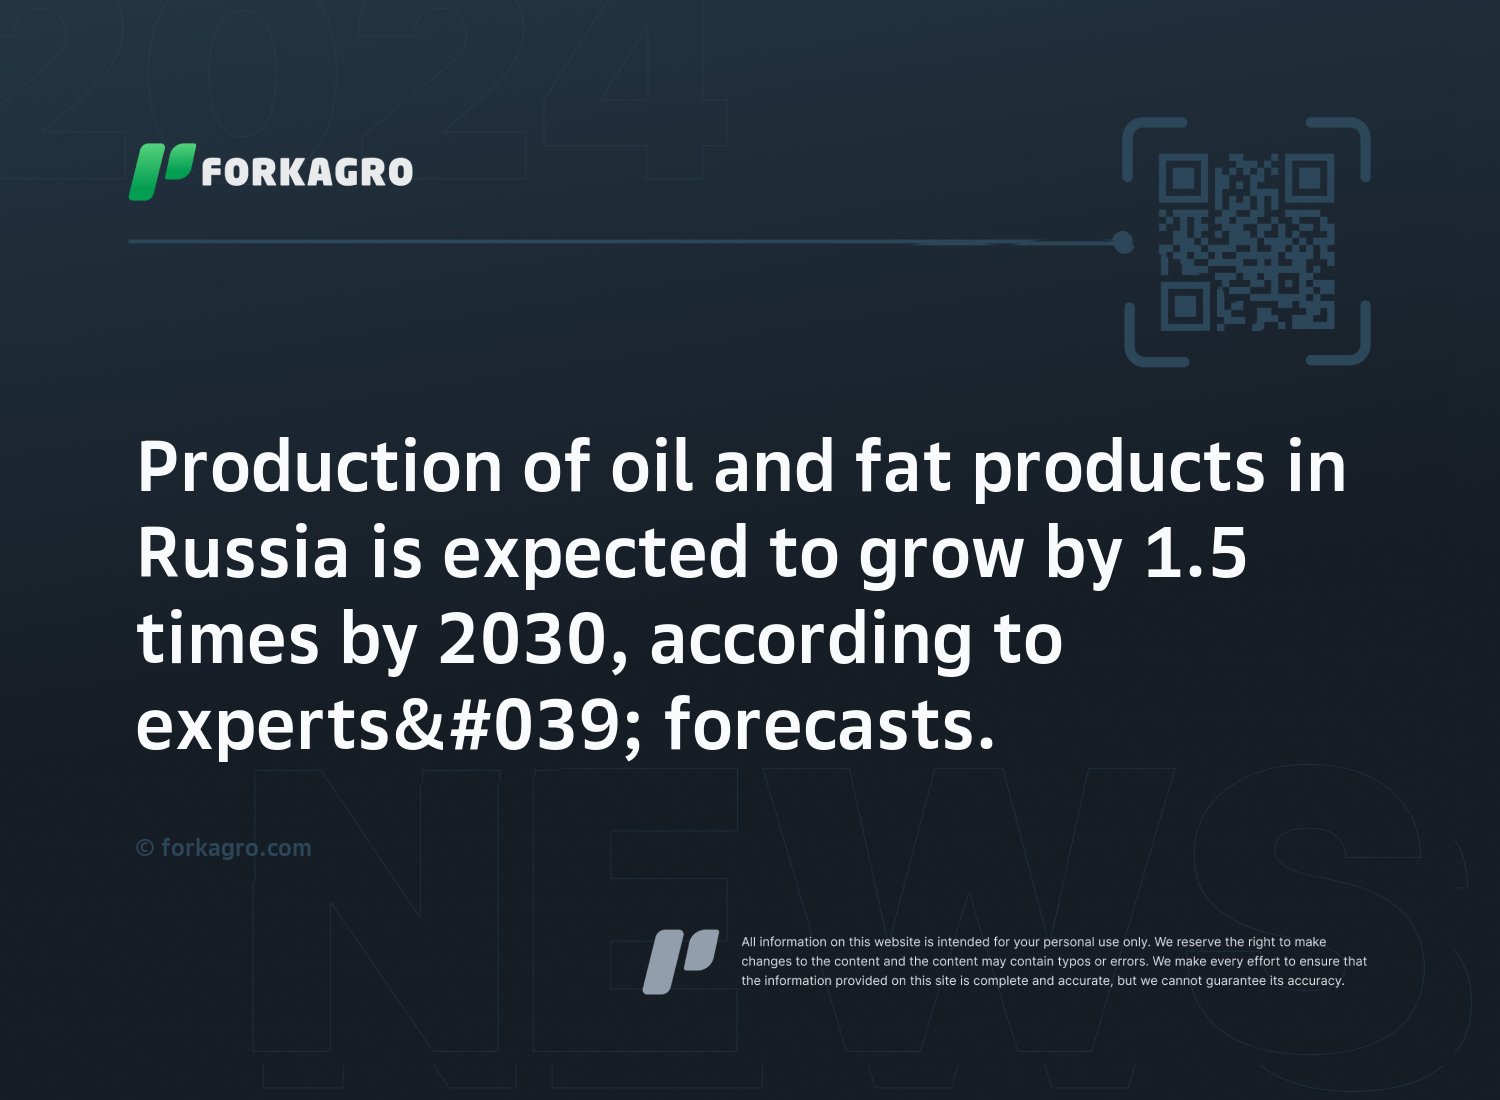 Production of oil and fat products in Russia is expected to grow by 1.5 times by 2030, according to experts' forecasts.